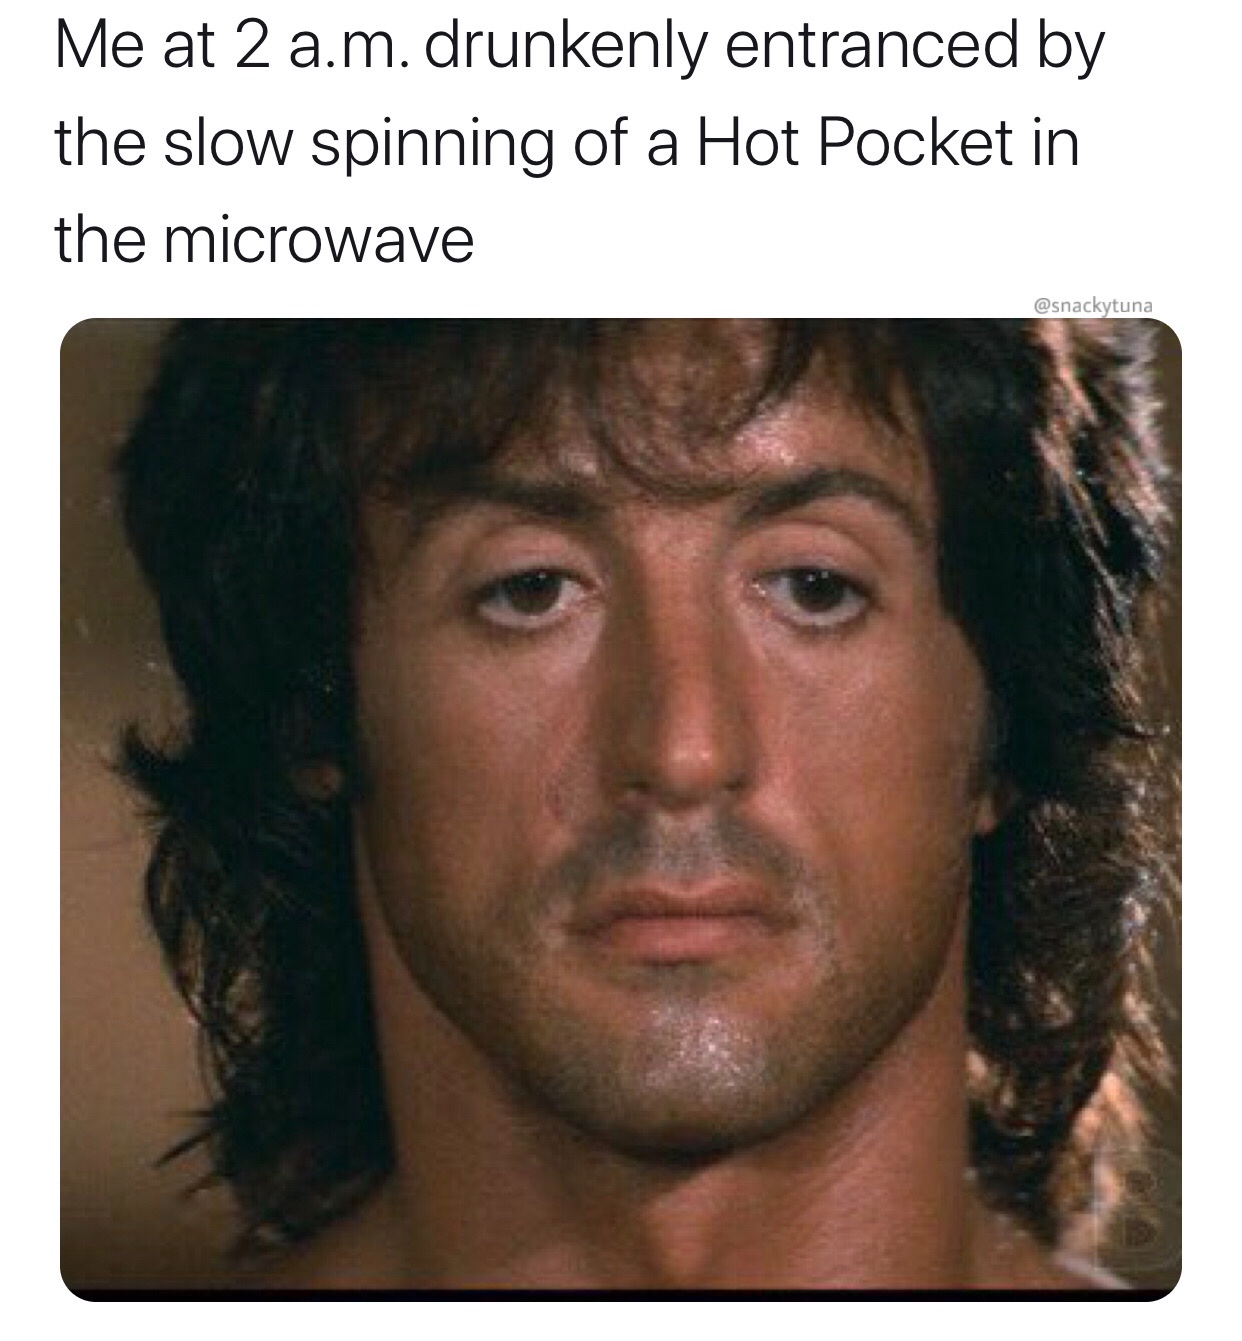 photo caption - Me at 2 a.m. drunkenly entranced by the slow spinning of a Hot Pocket in the microwave